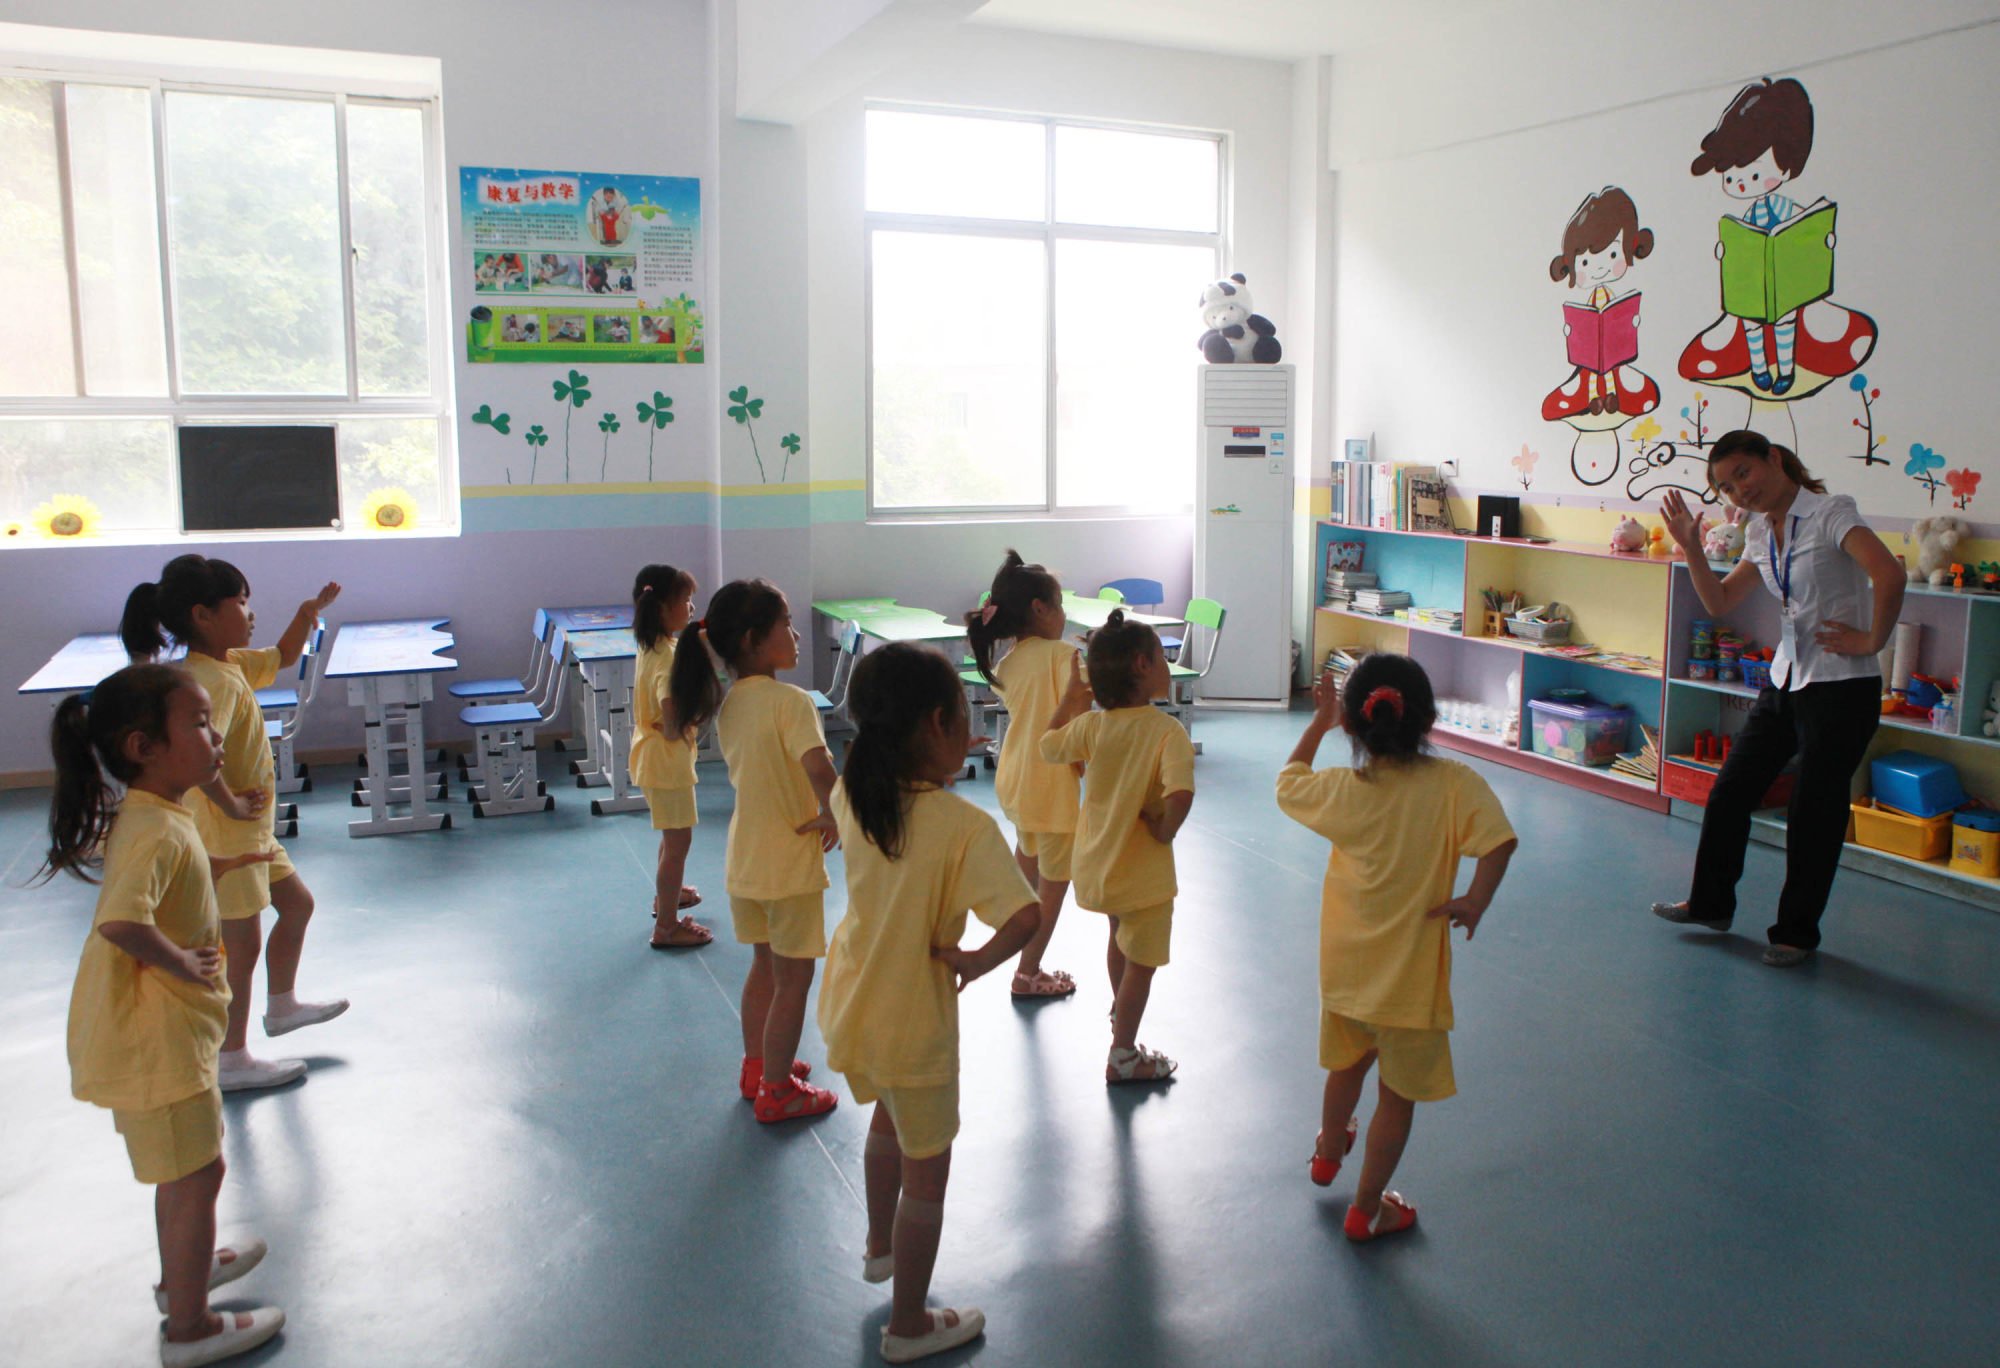 Cases of physical abuse of children at nurseries in China have been reported in the past. Photo: Shutterstock